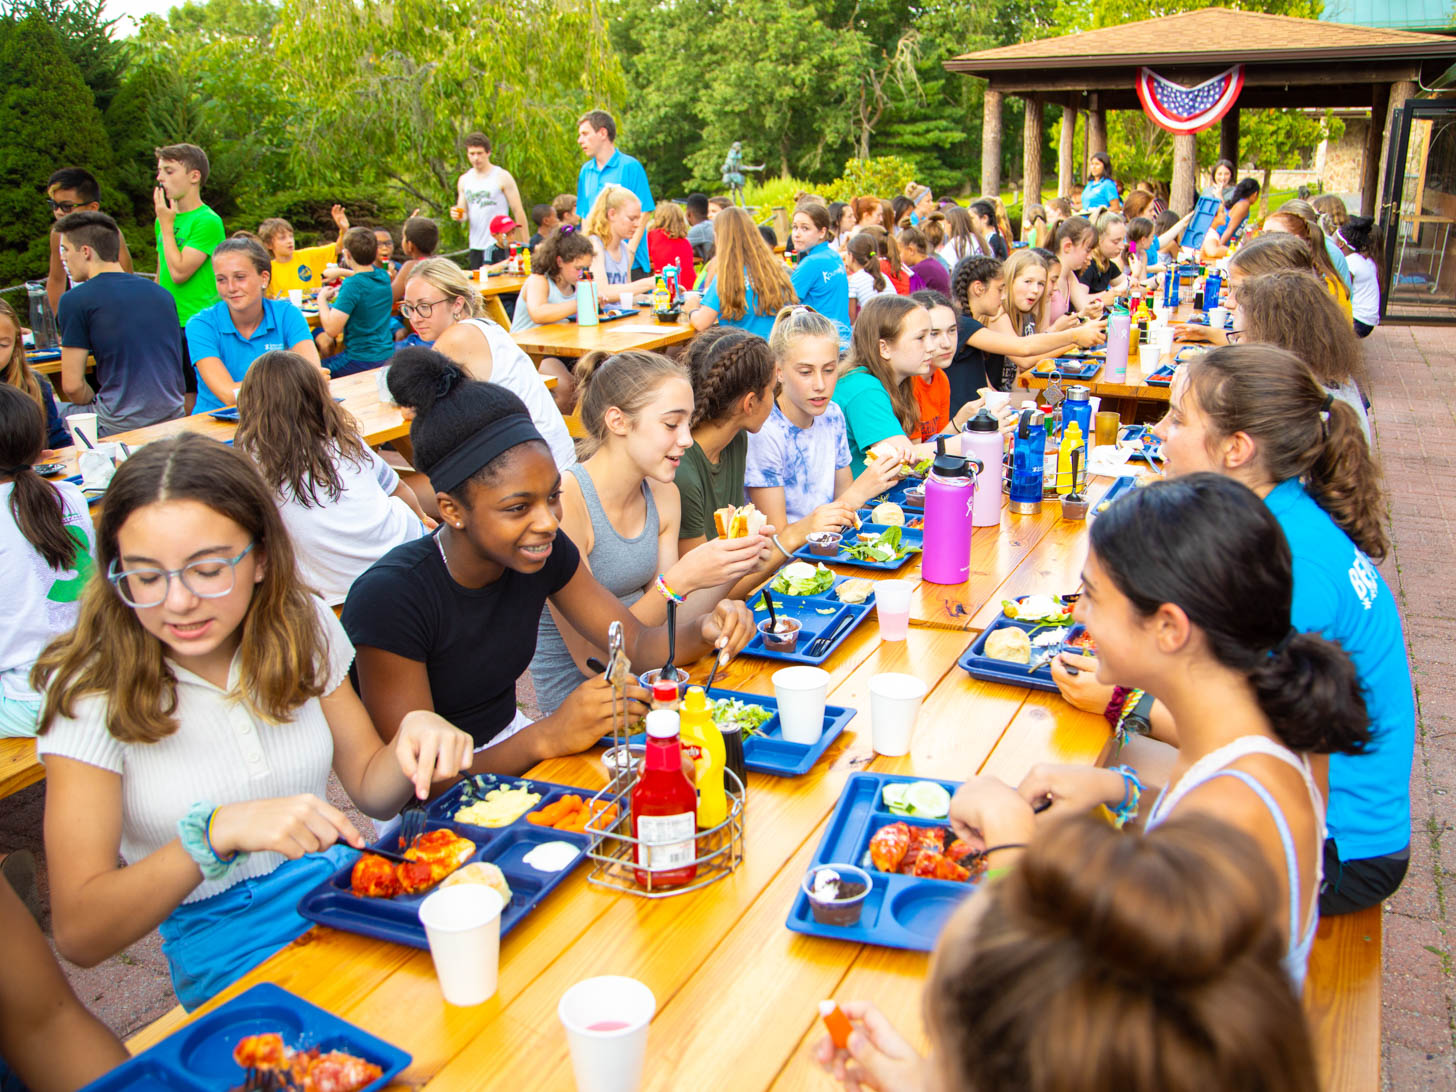 large group of kids and adults eating at picnic tables